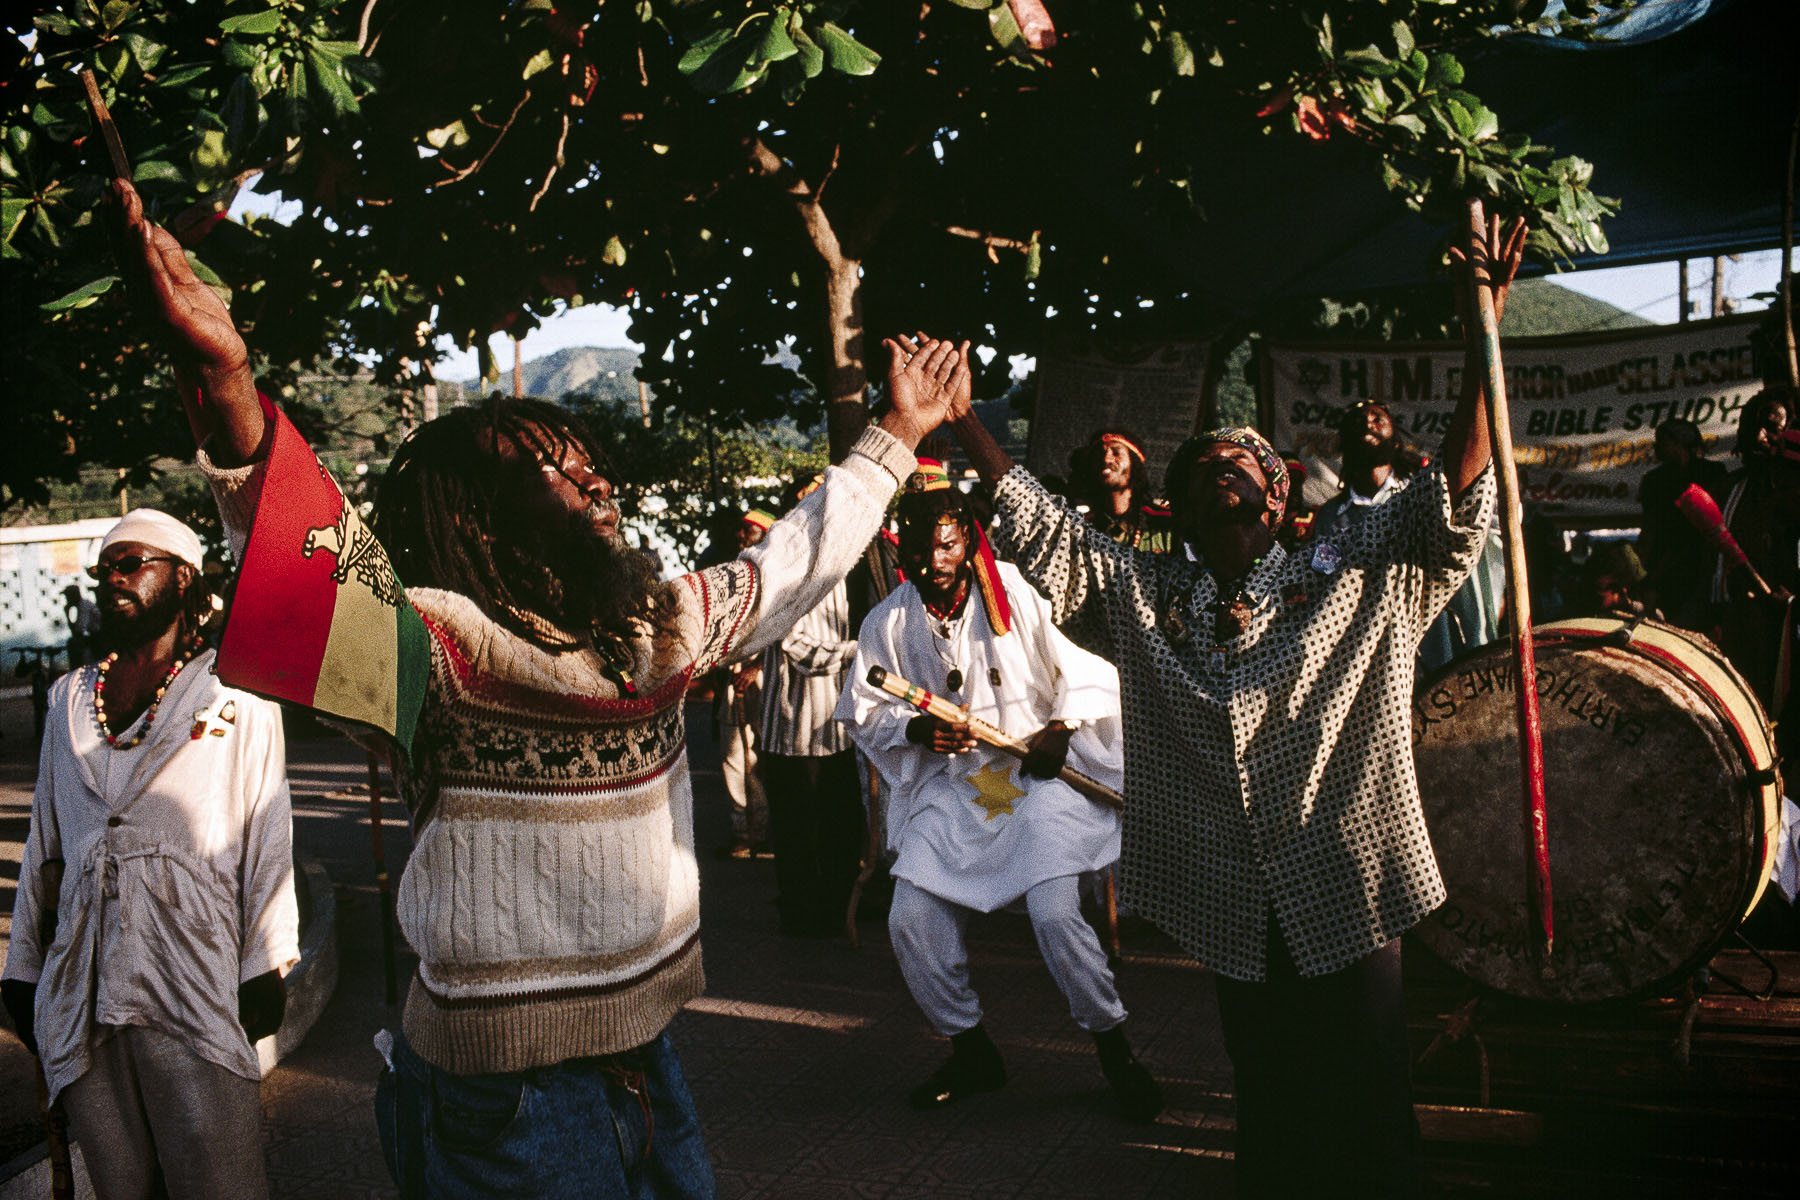 Members of the Nyabinghi Rasta movement during a ceremony in January 2001